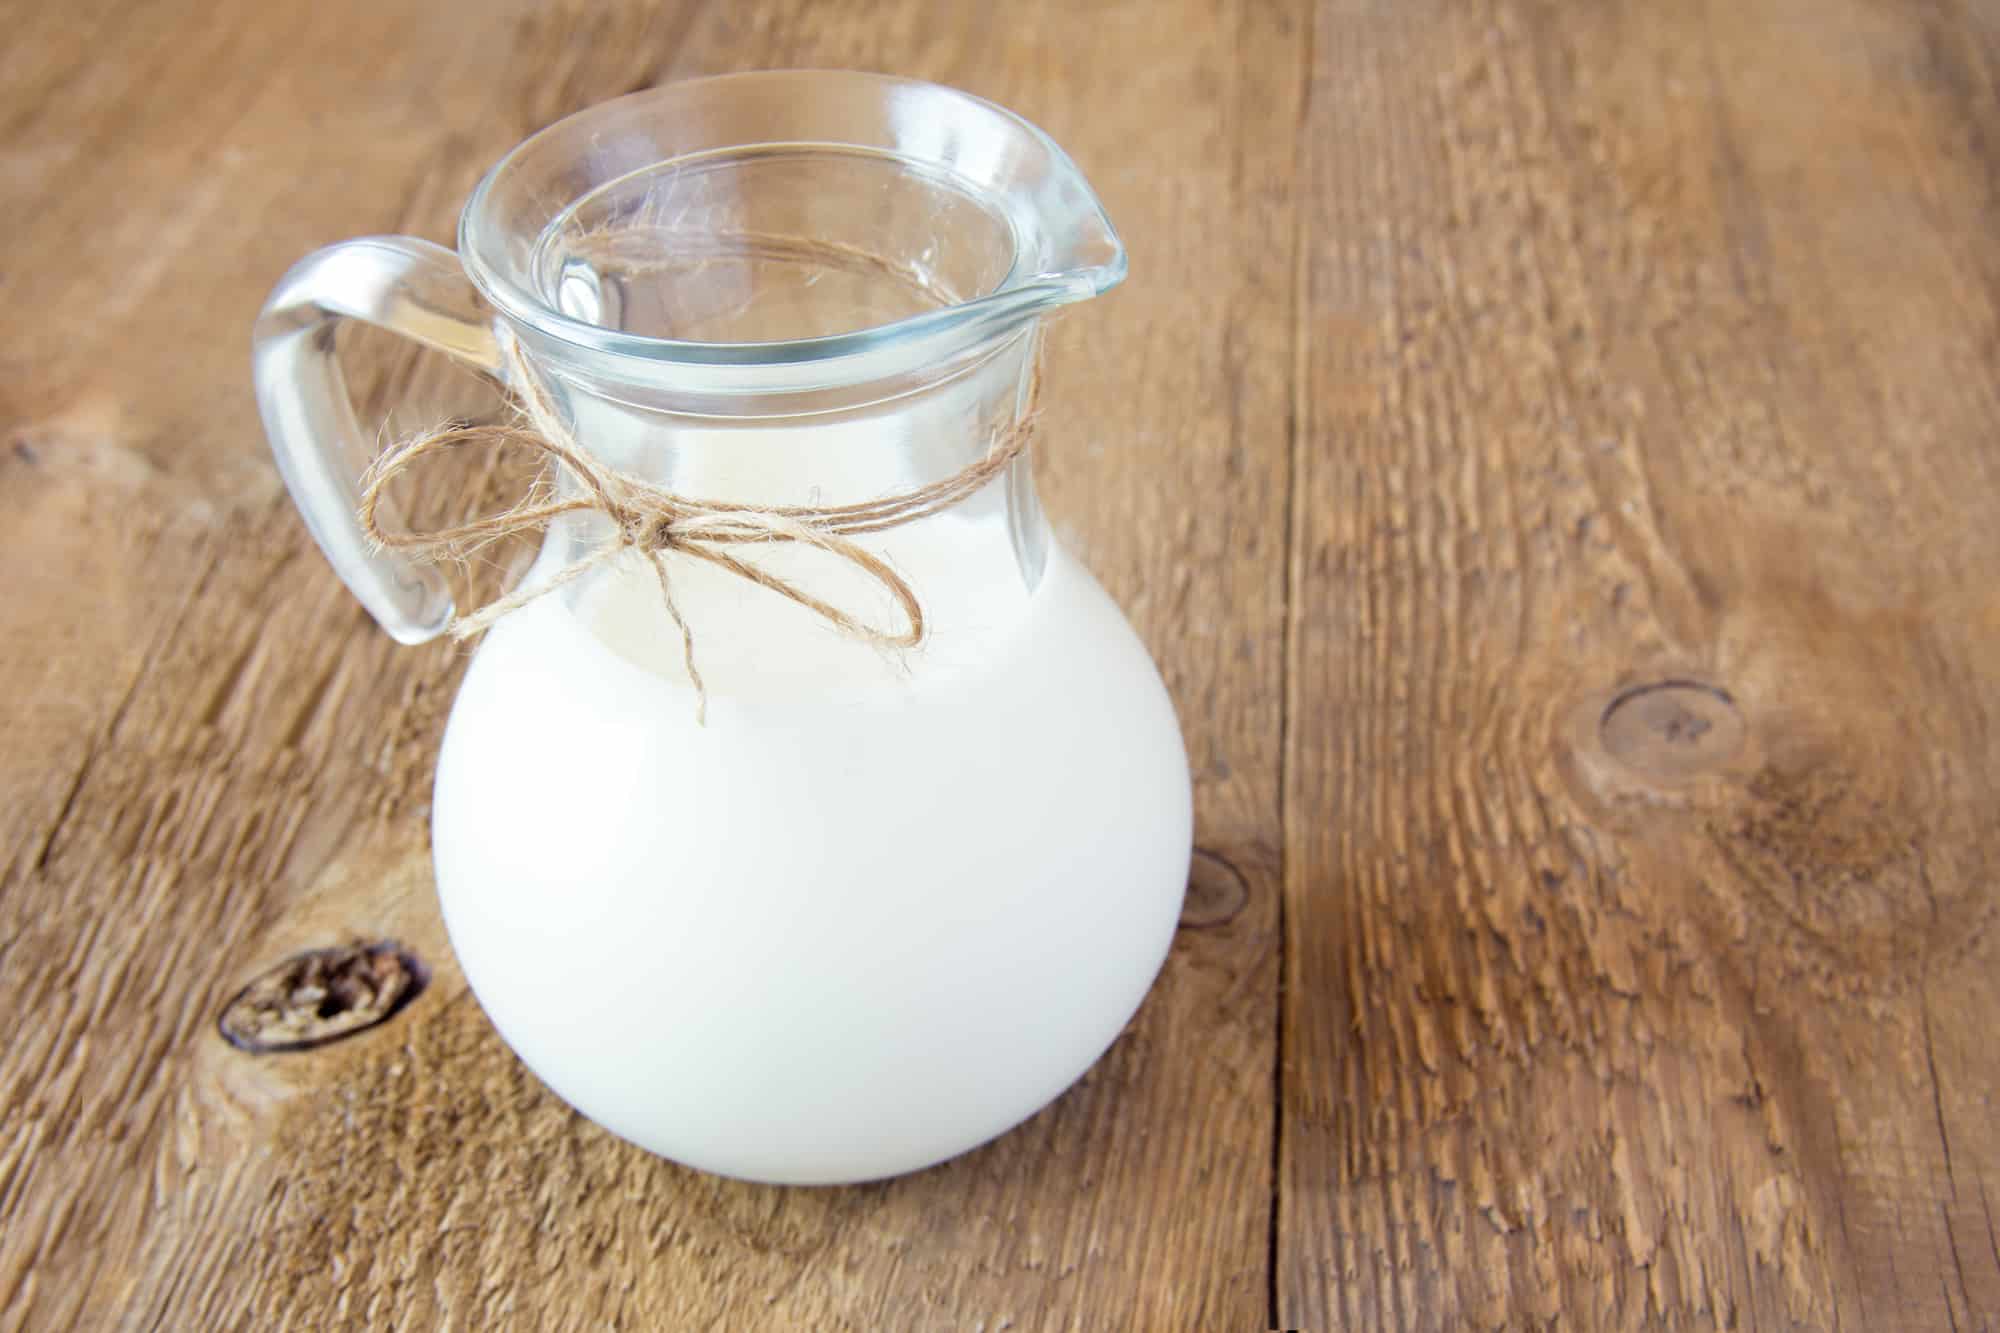 Milk in glass jar on rustic wooden table